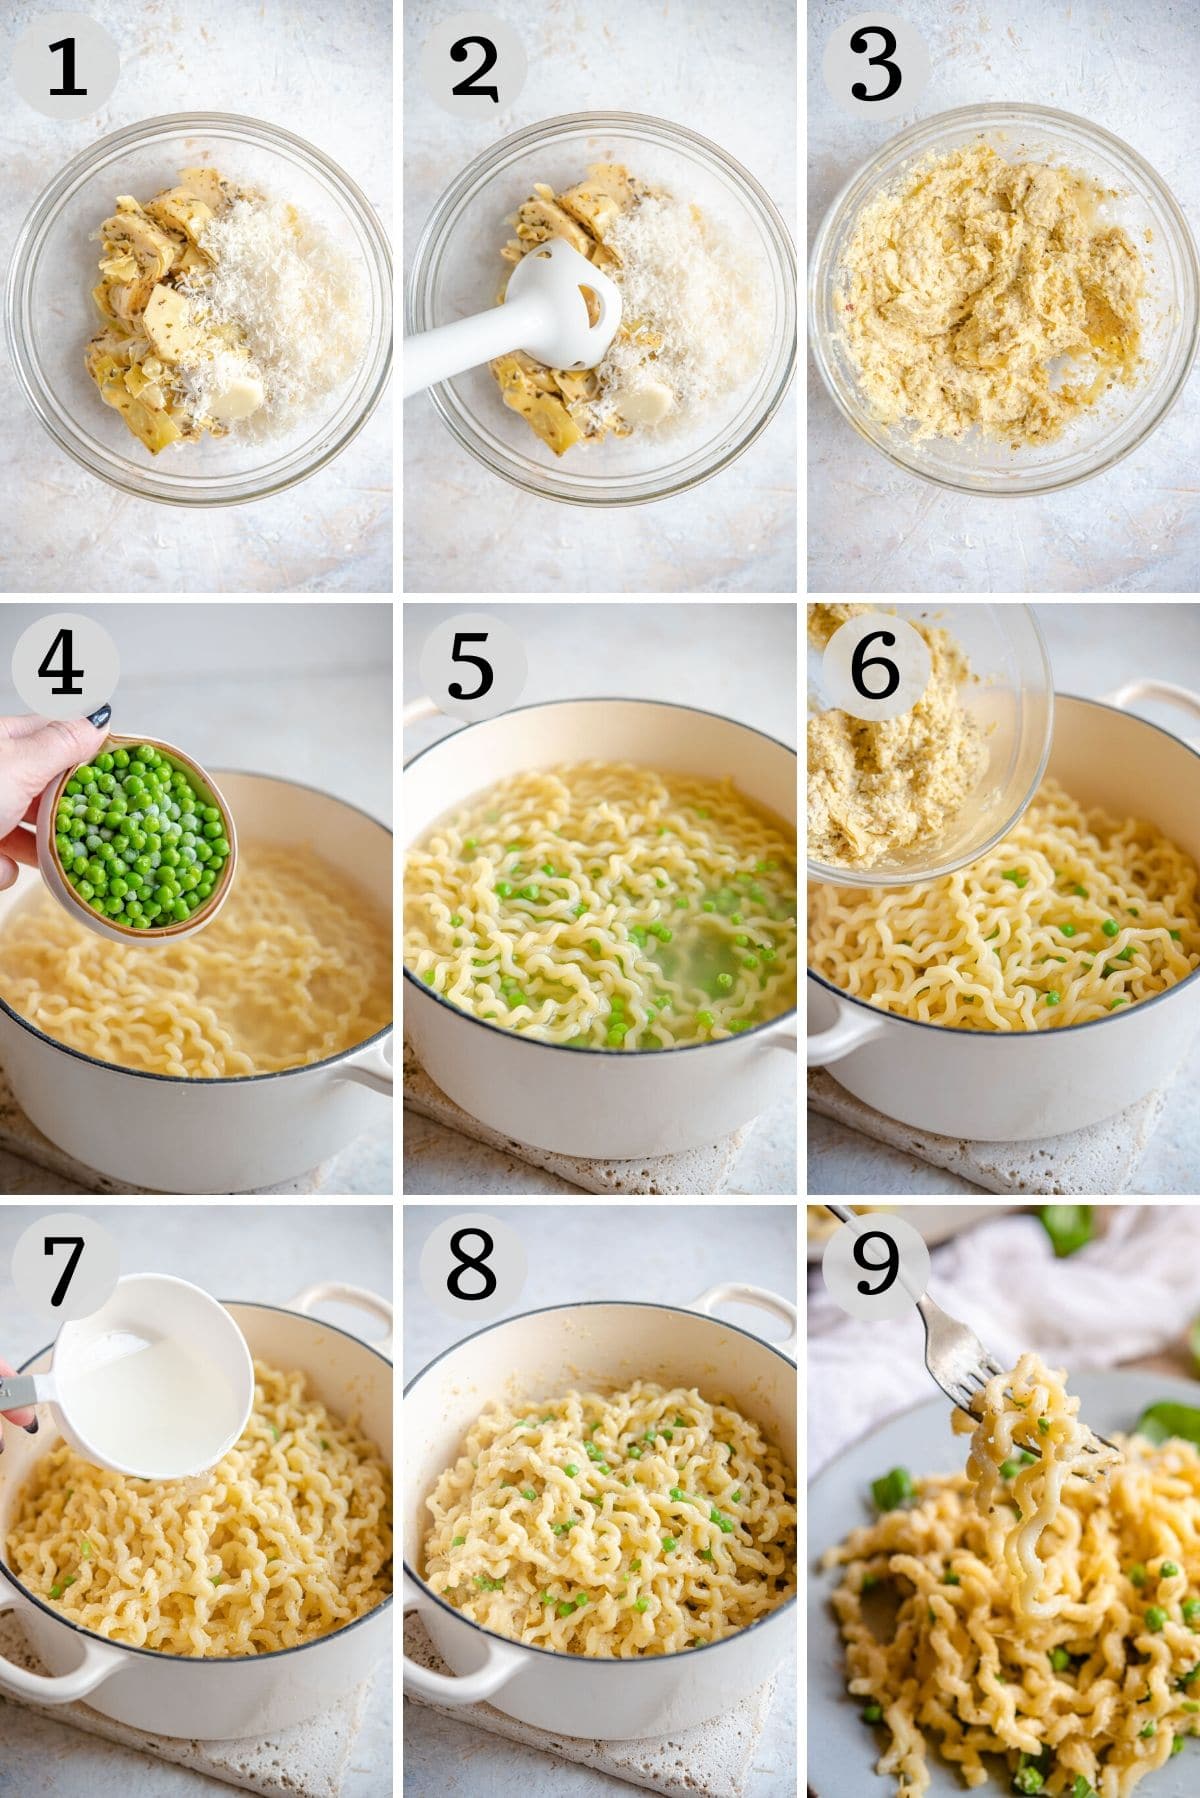 Step by step photos for making artichoke pasta